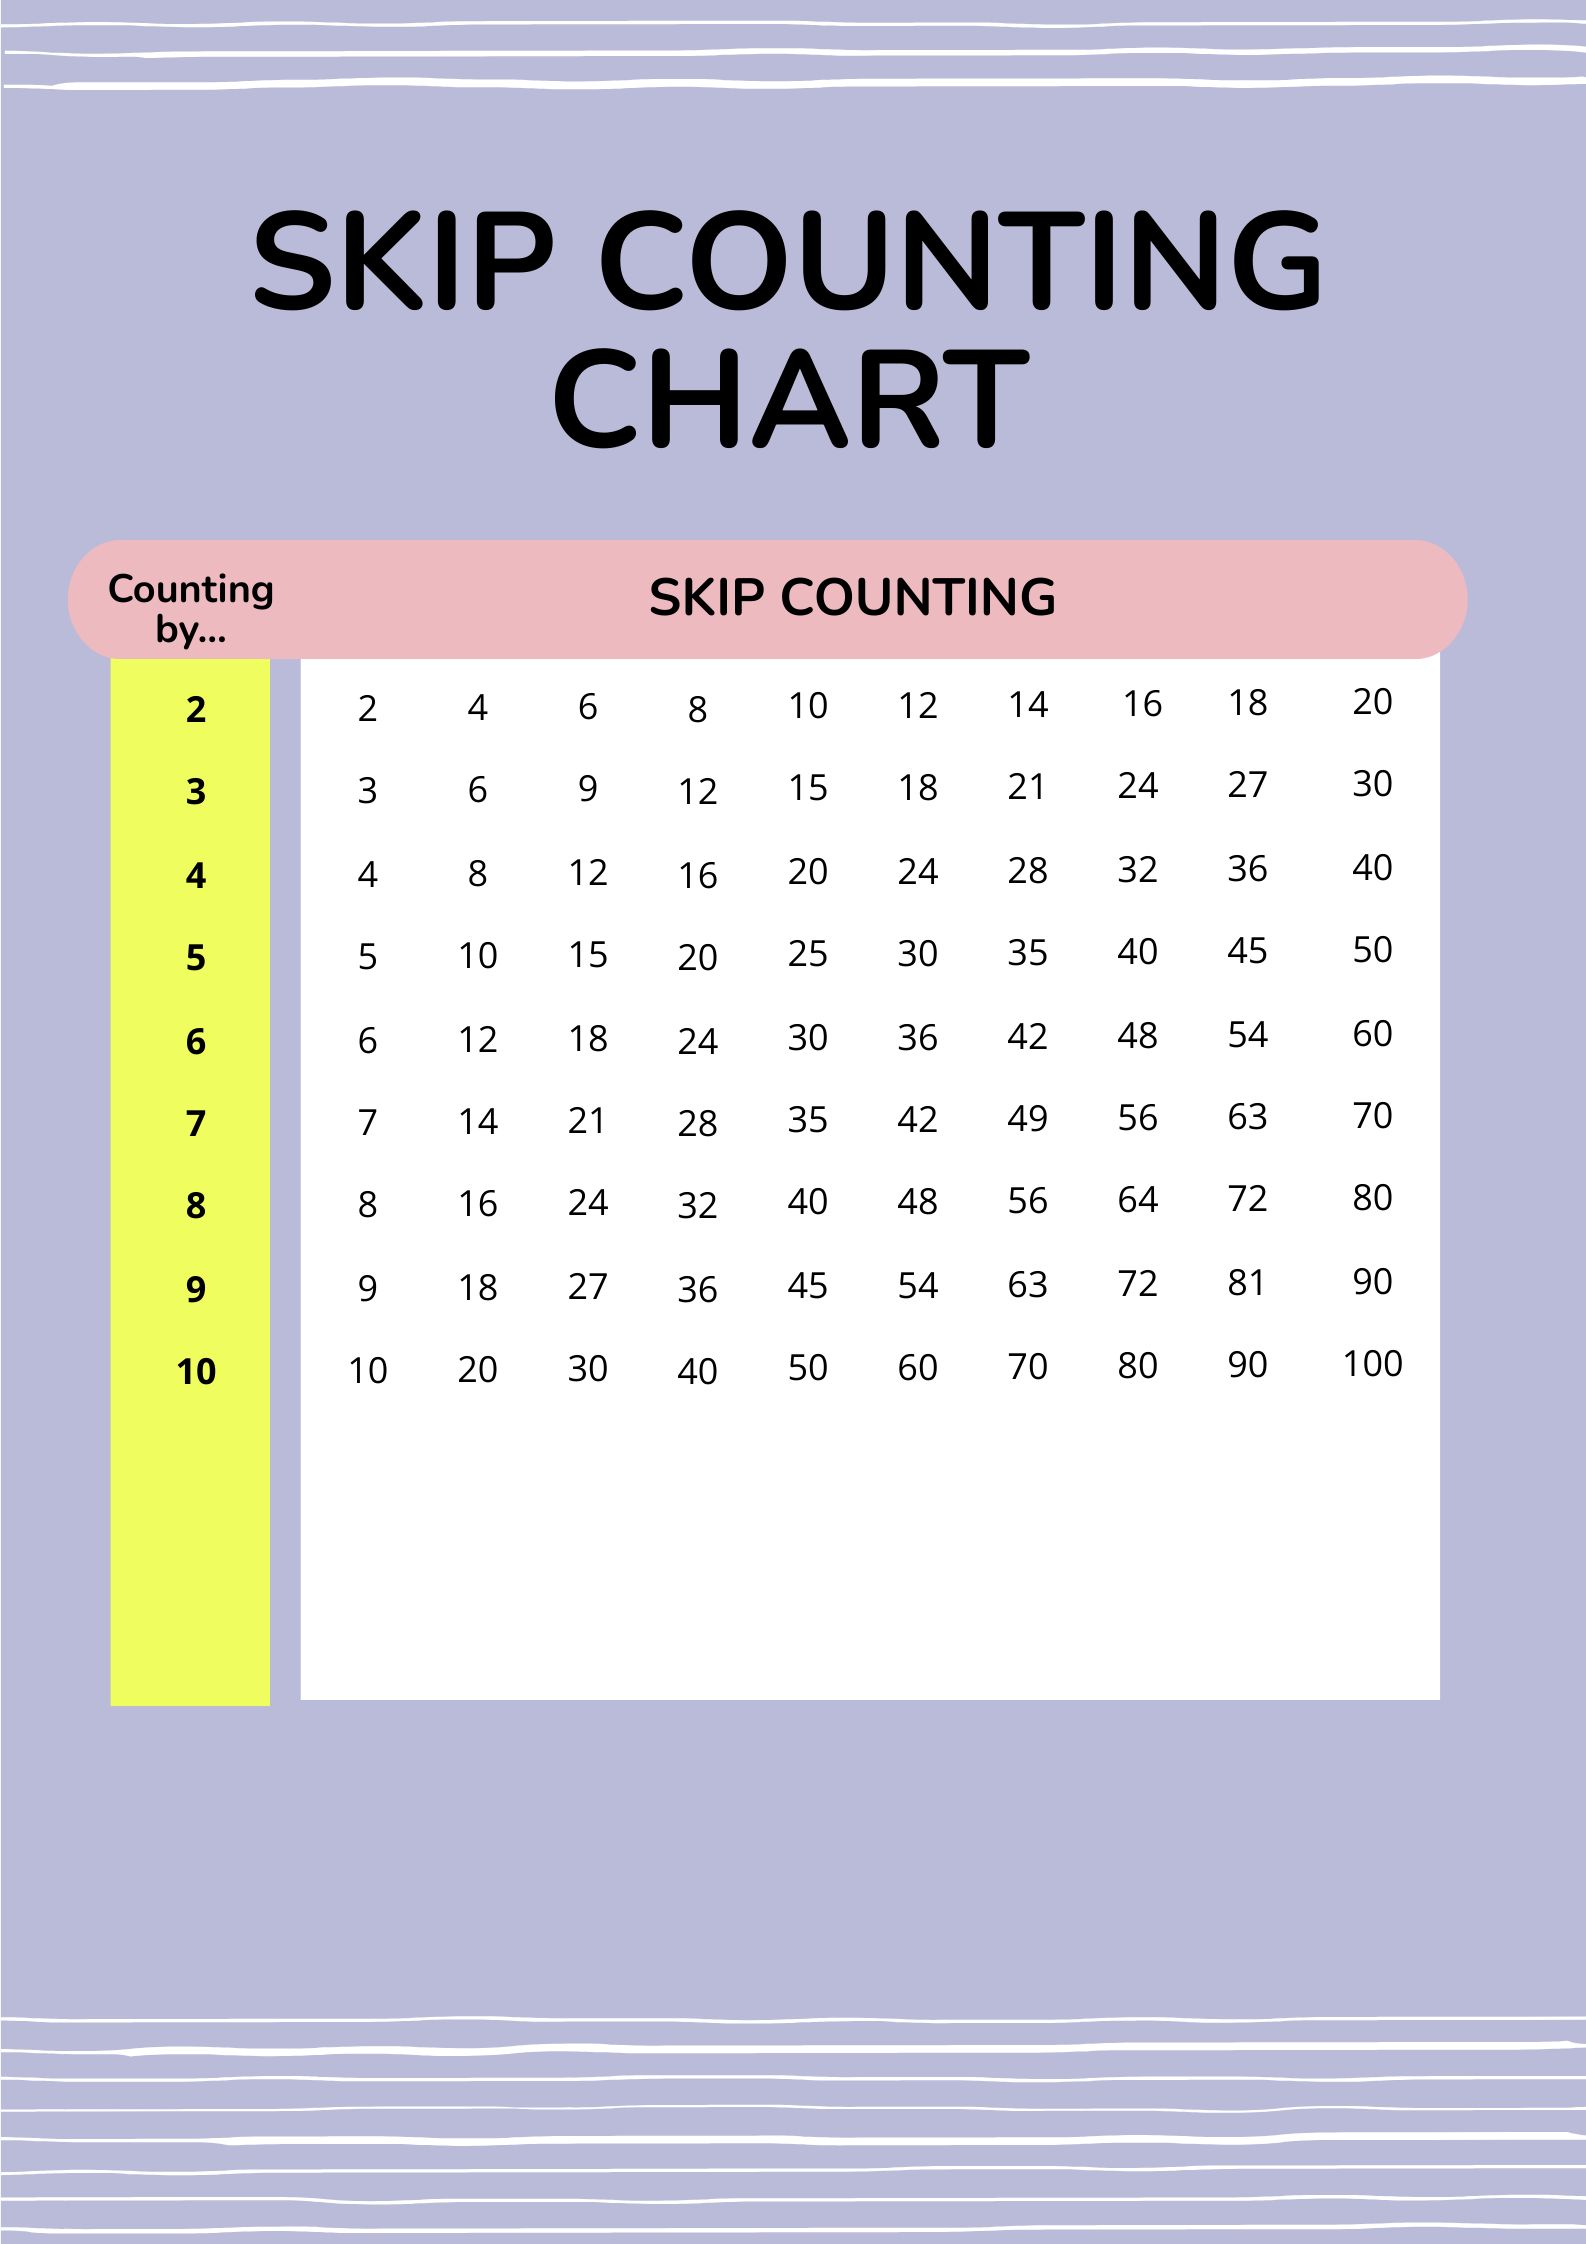 skip-counting-chart-download-in-pdf-illustrator-template